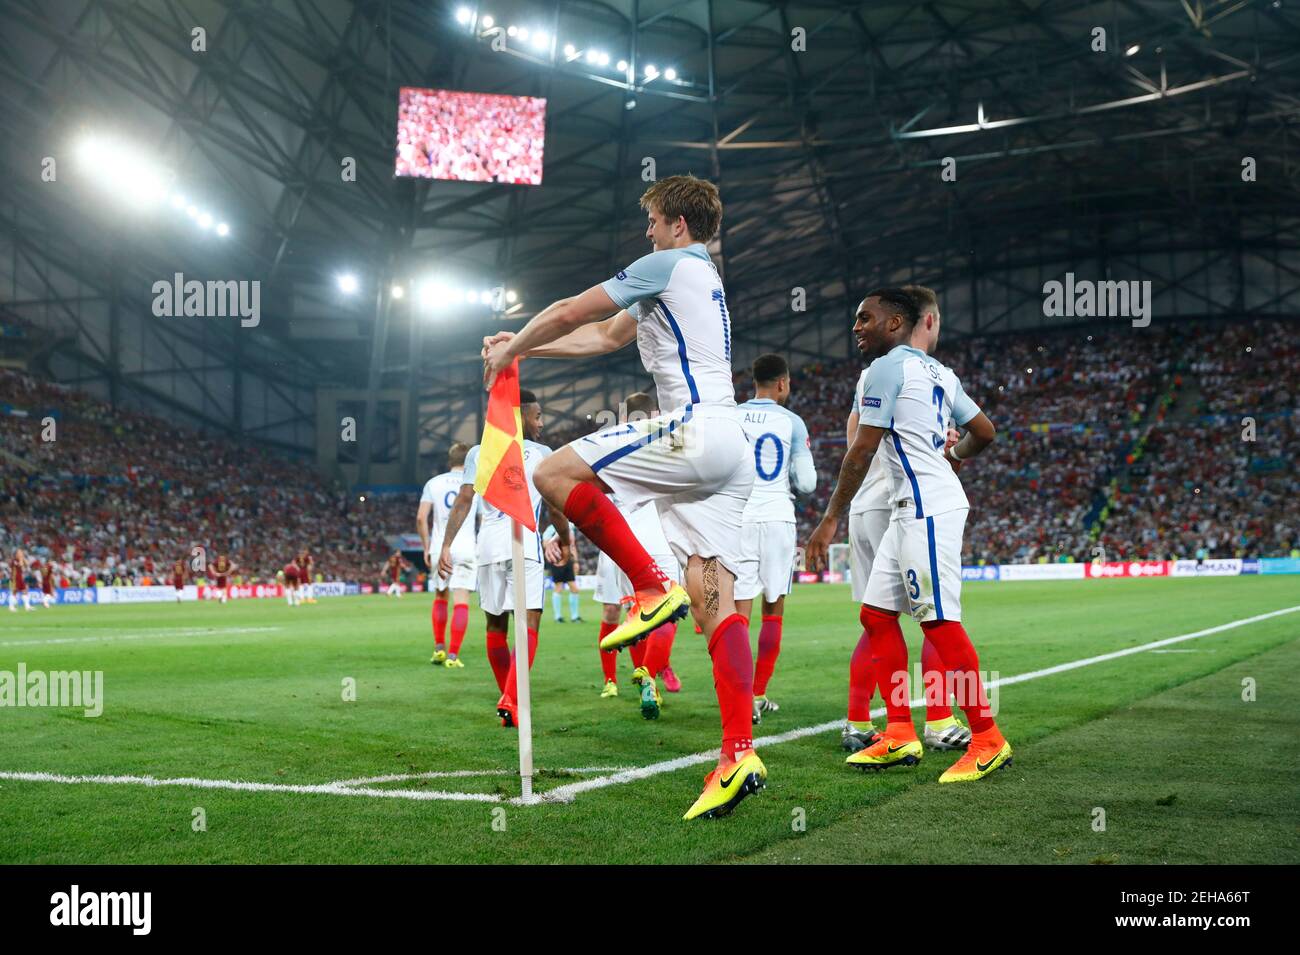 Football Soccer - England v Russia - EURO 2016 - Group B - Stade Vélodrome, Marseille, France - 11/6/16  England's Eric Dier celebrates with teammates after scoring their first goal  REUTERS/Eddie Keogh  Livepic Stock Photo